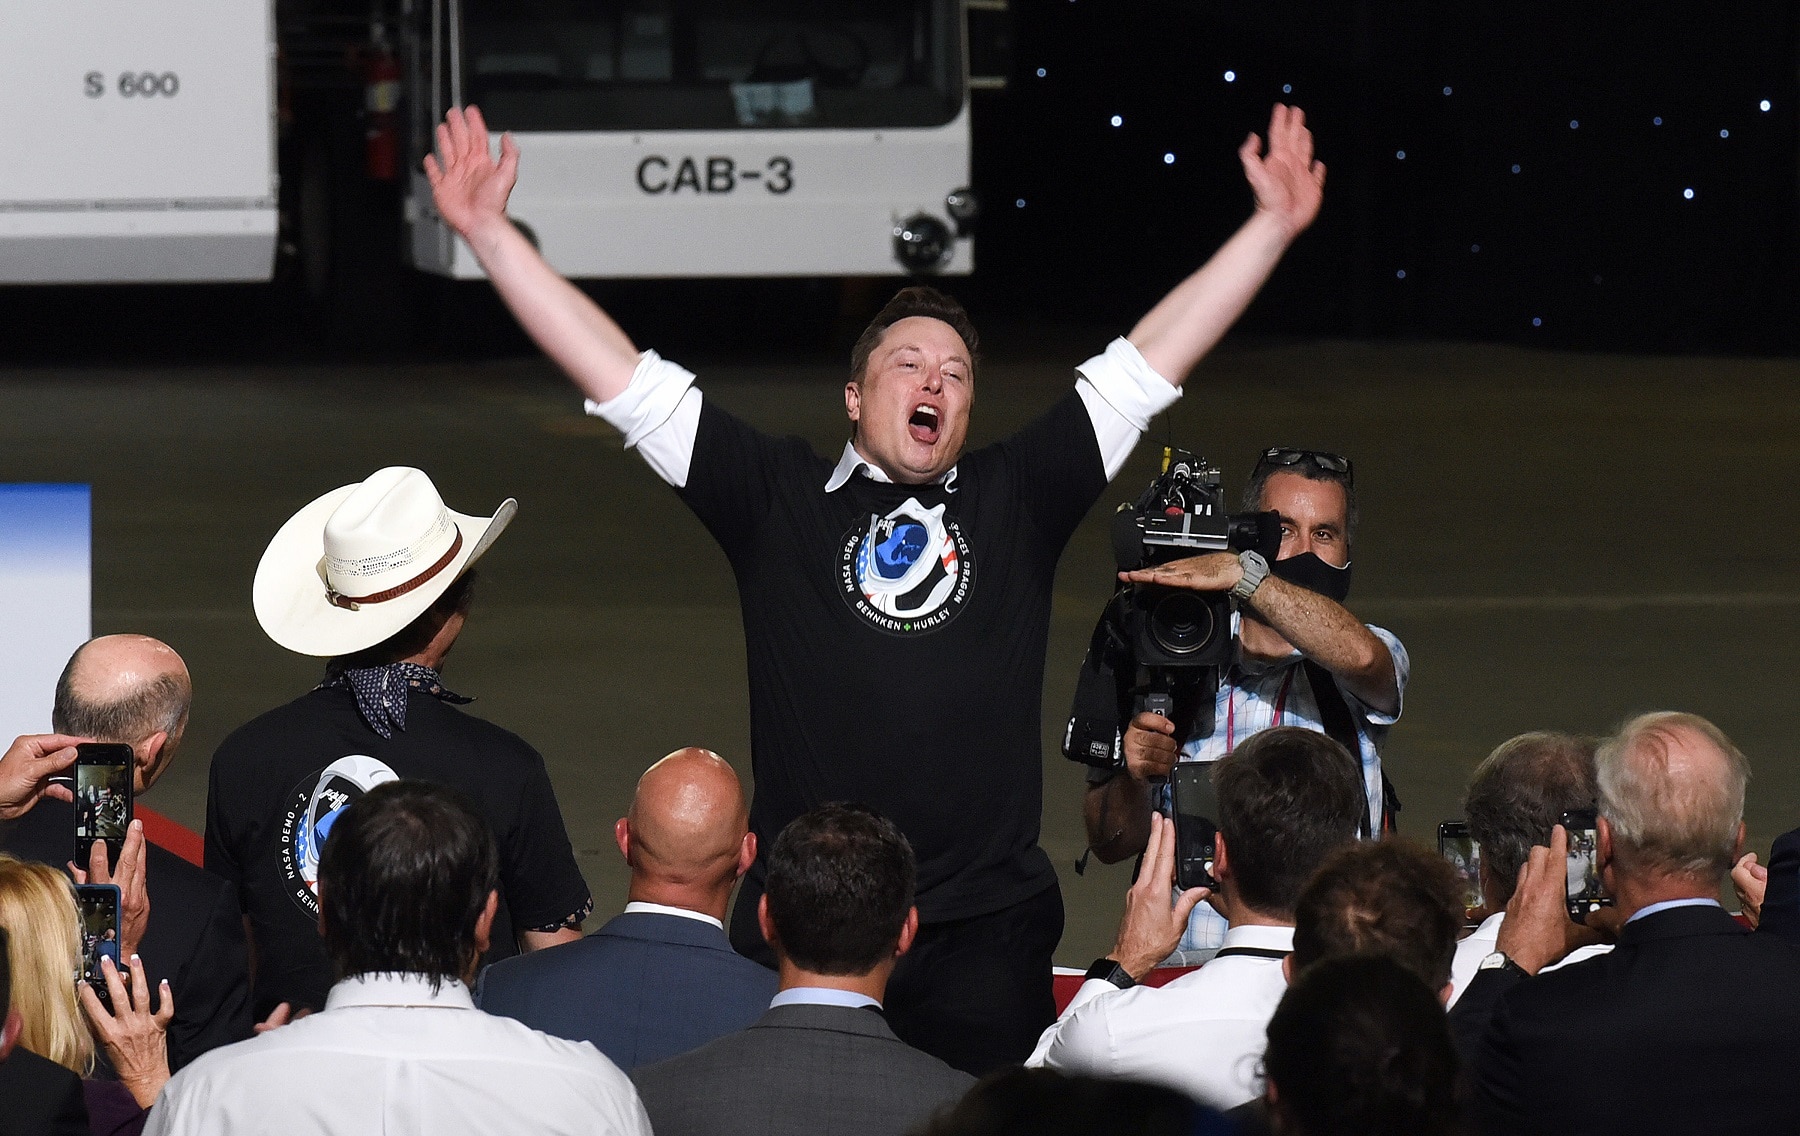 SpaceX CEO Elon Musk celebrates the successful launch of a Falcon 9 rocket with the Crew Dragon spacecraft.